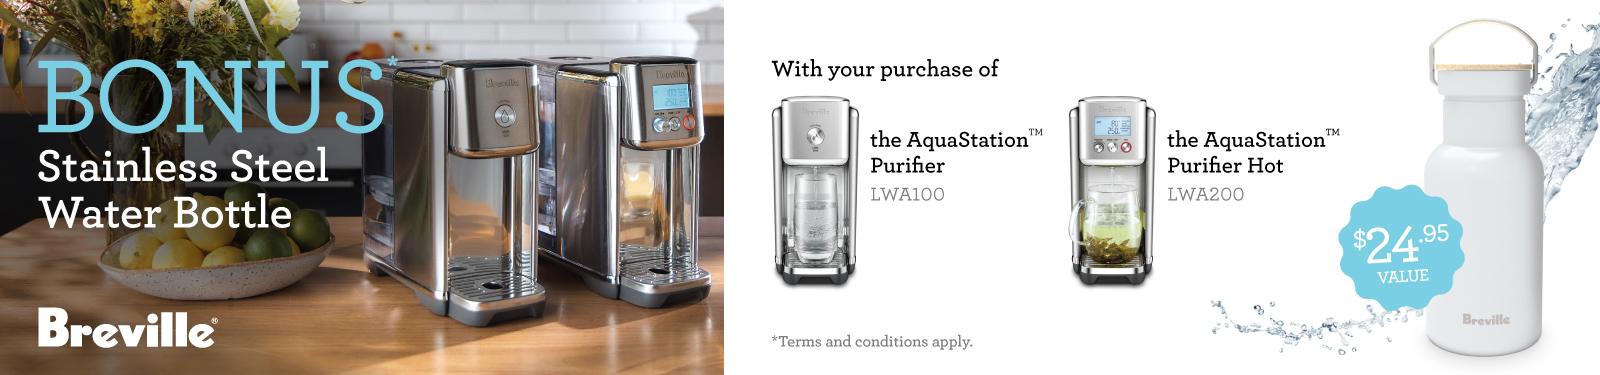 Bonus Stainless Steel Water Bottle with selected Breville Aquastation at Retravision